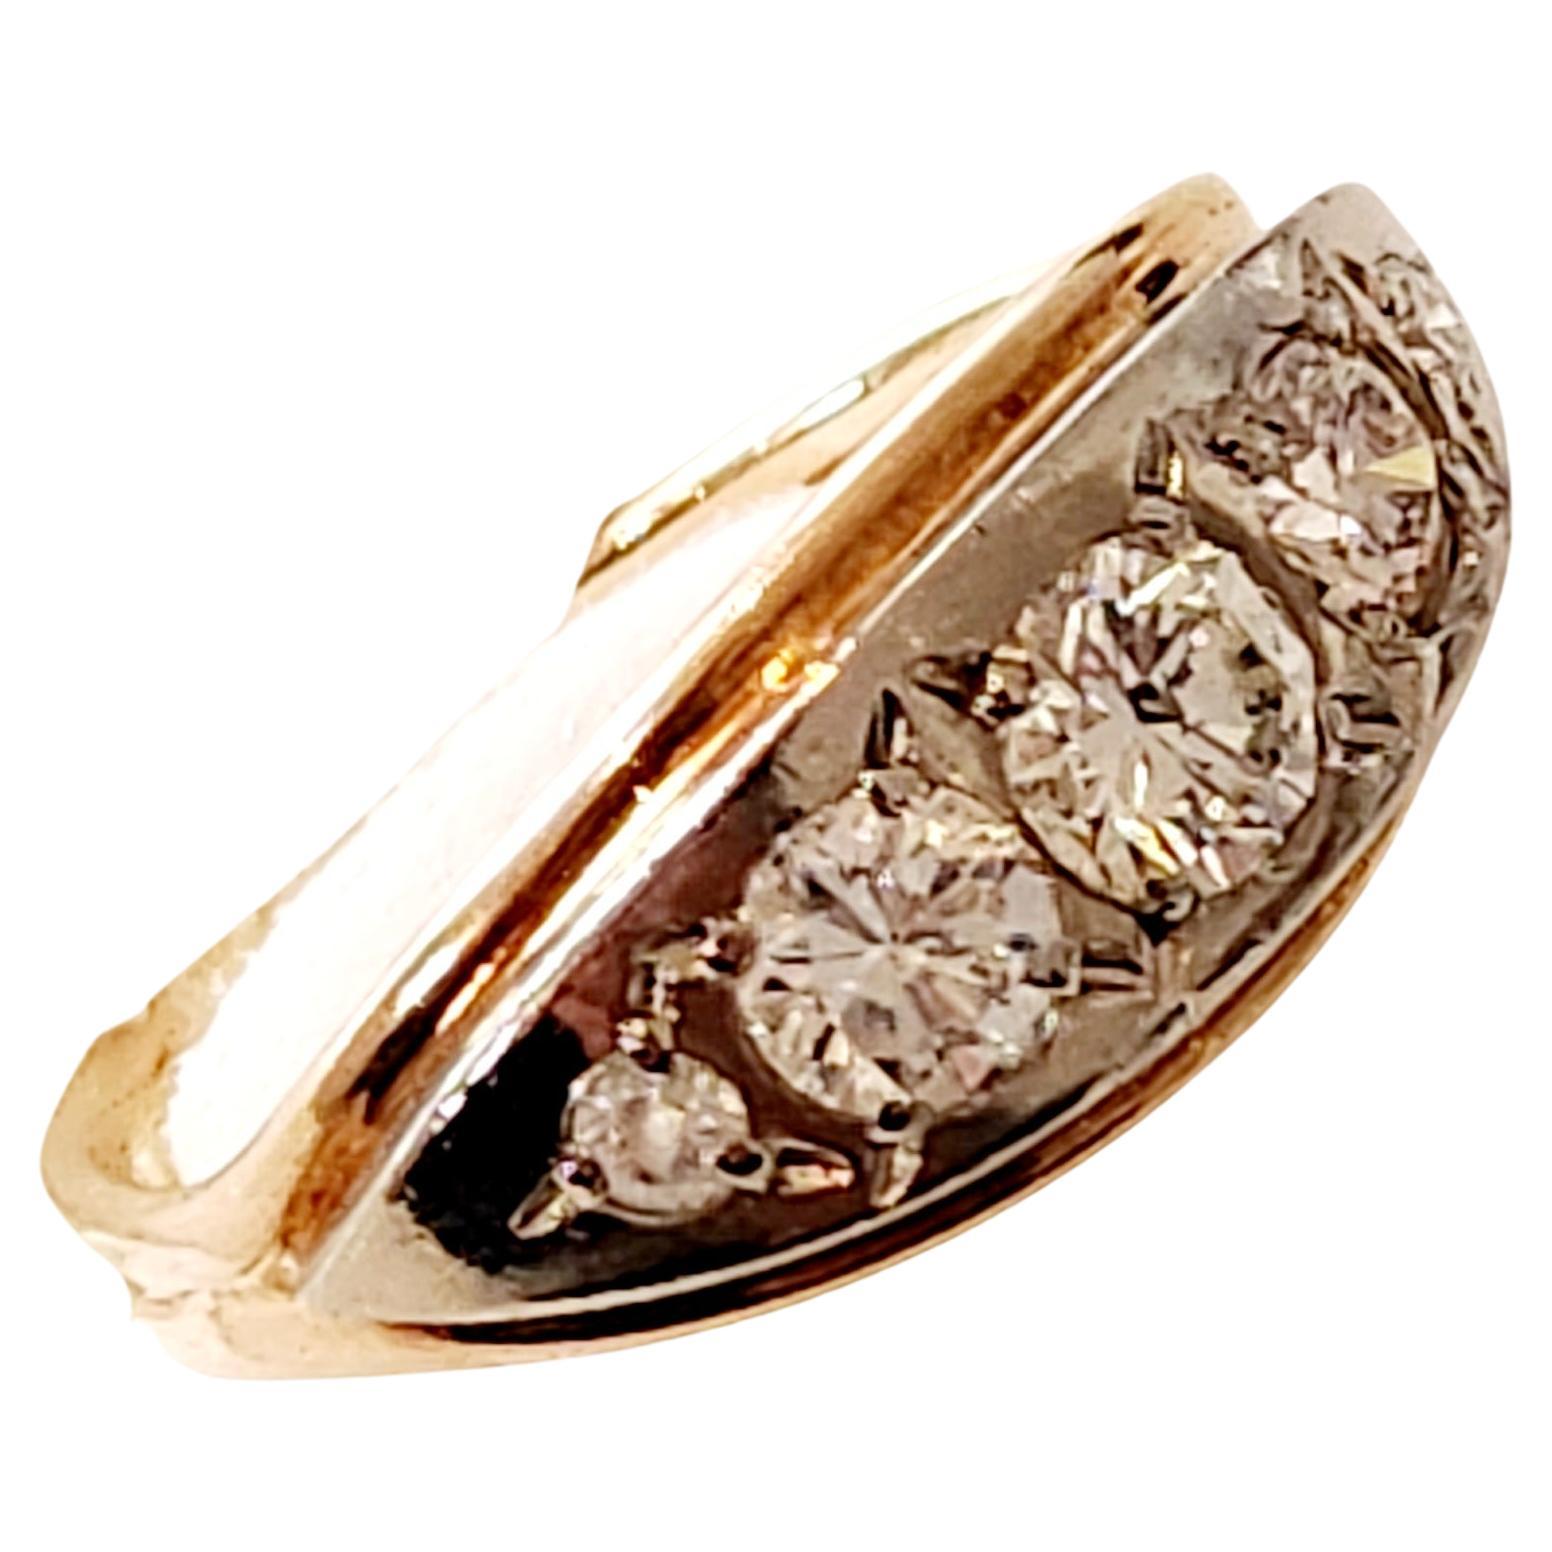 Vintage 14k gold 2 tone colour ring white gold and rose gold centered with 5 old european cut diamonds with an estimate weight of 1.20 carats H colour white vs clearity excellect cut and spark hall marked 583 and soviet control mark and letter L for